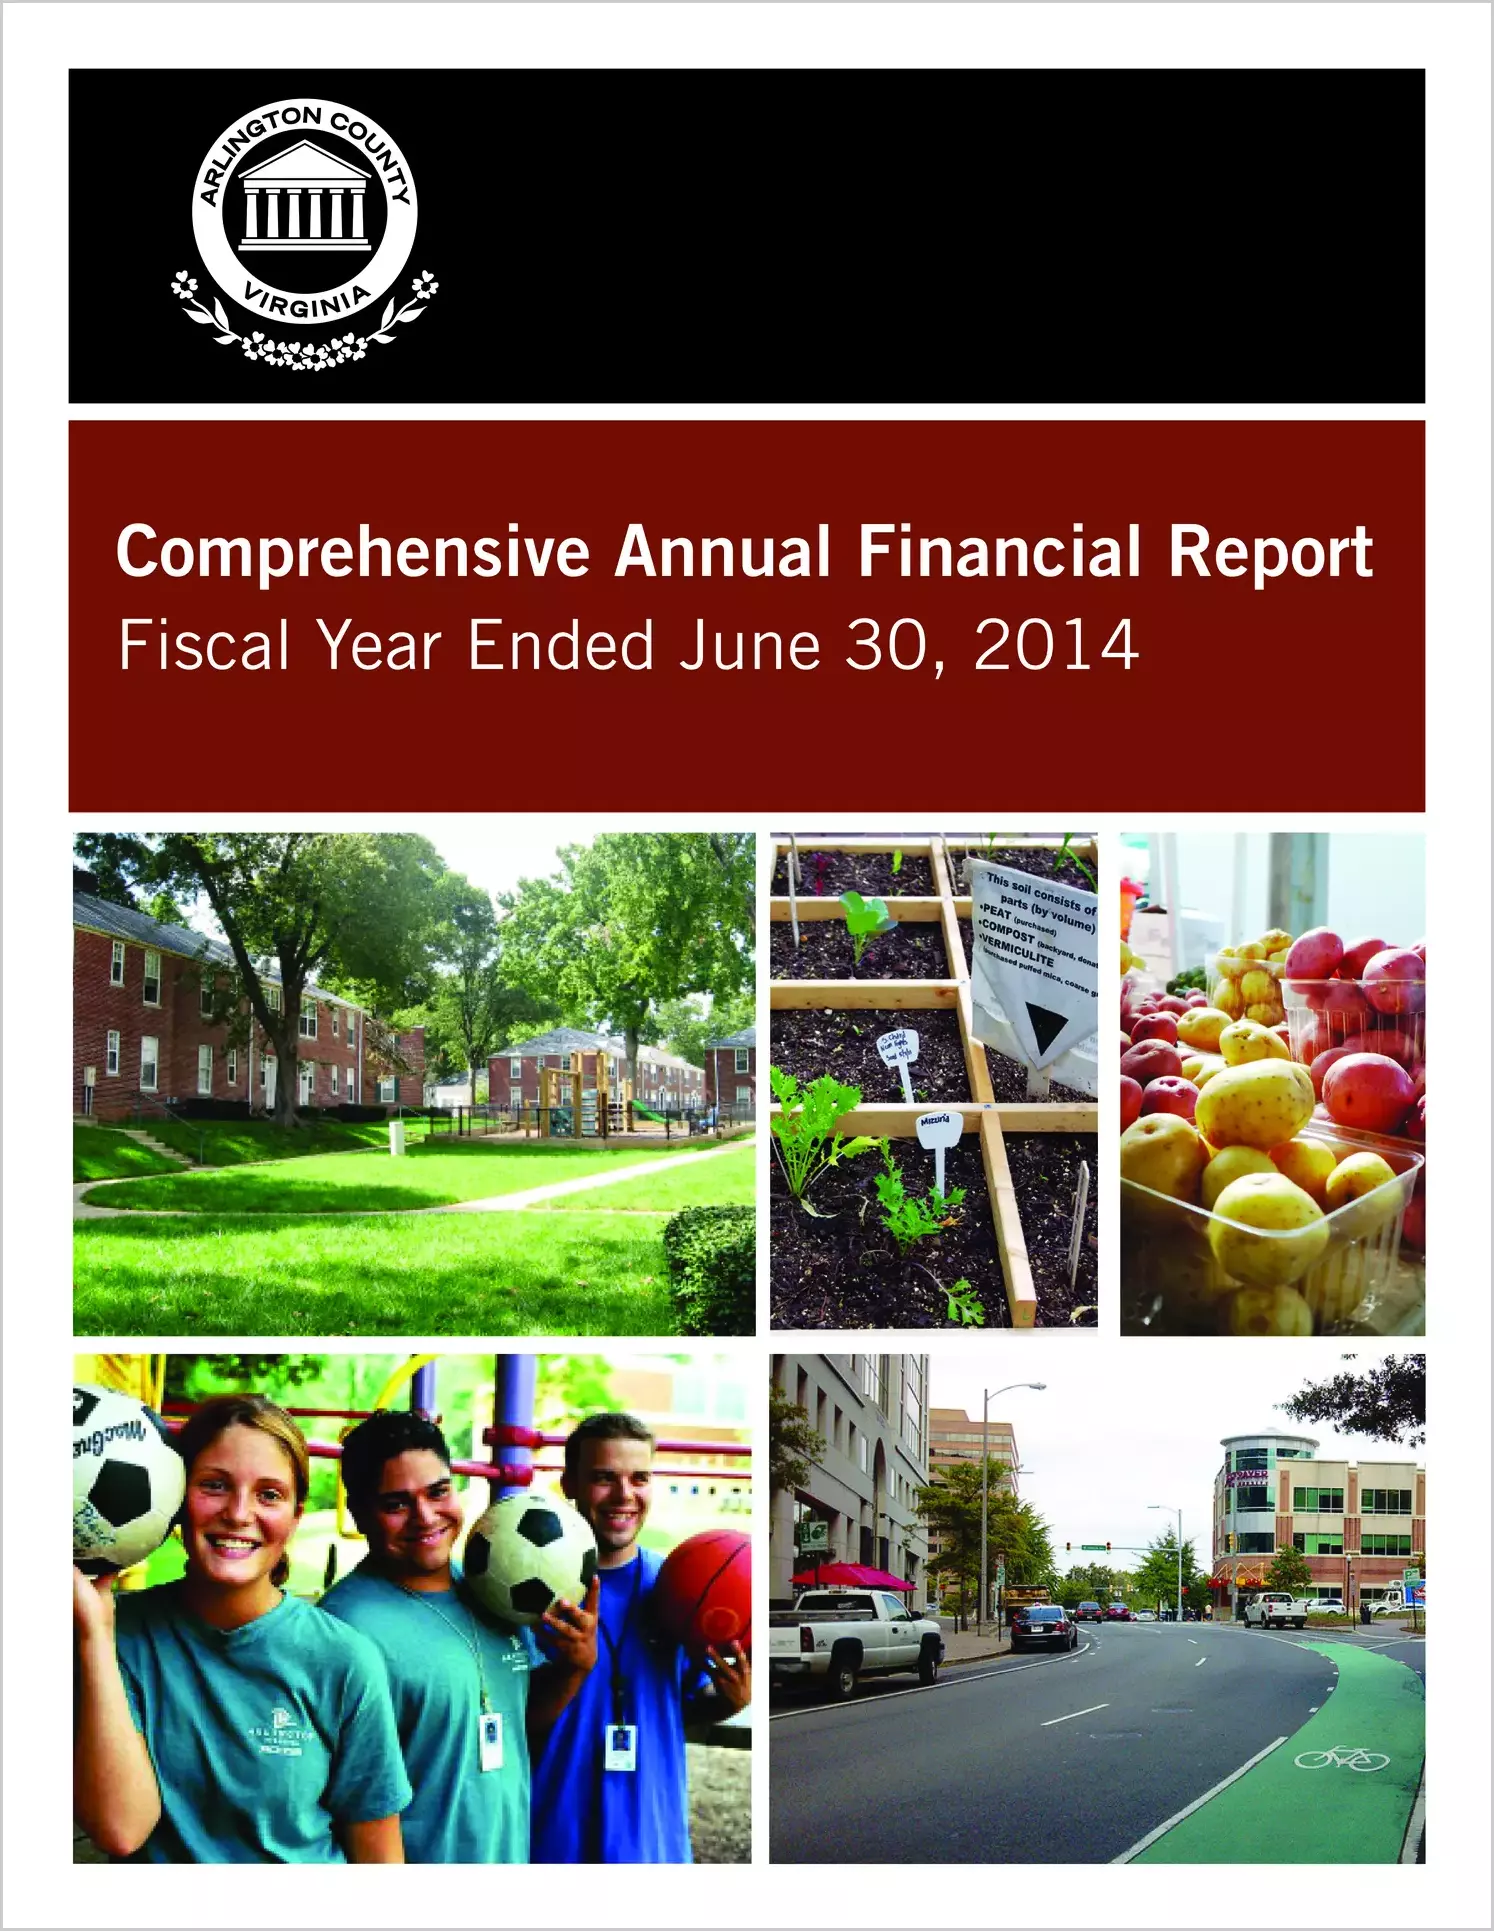 2014 Annual Financial Report for County of Arlington